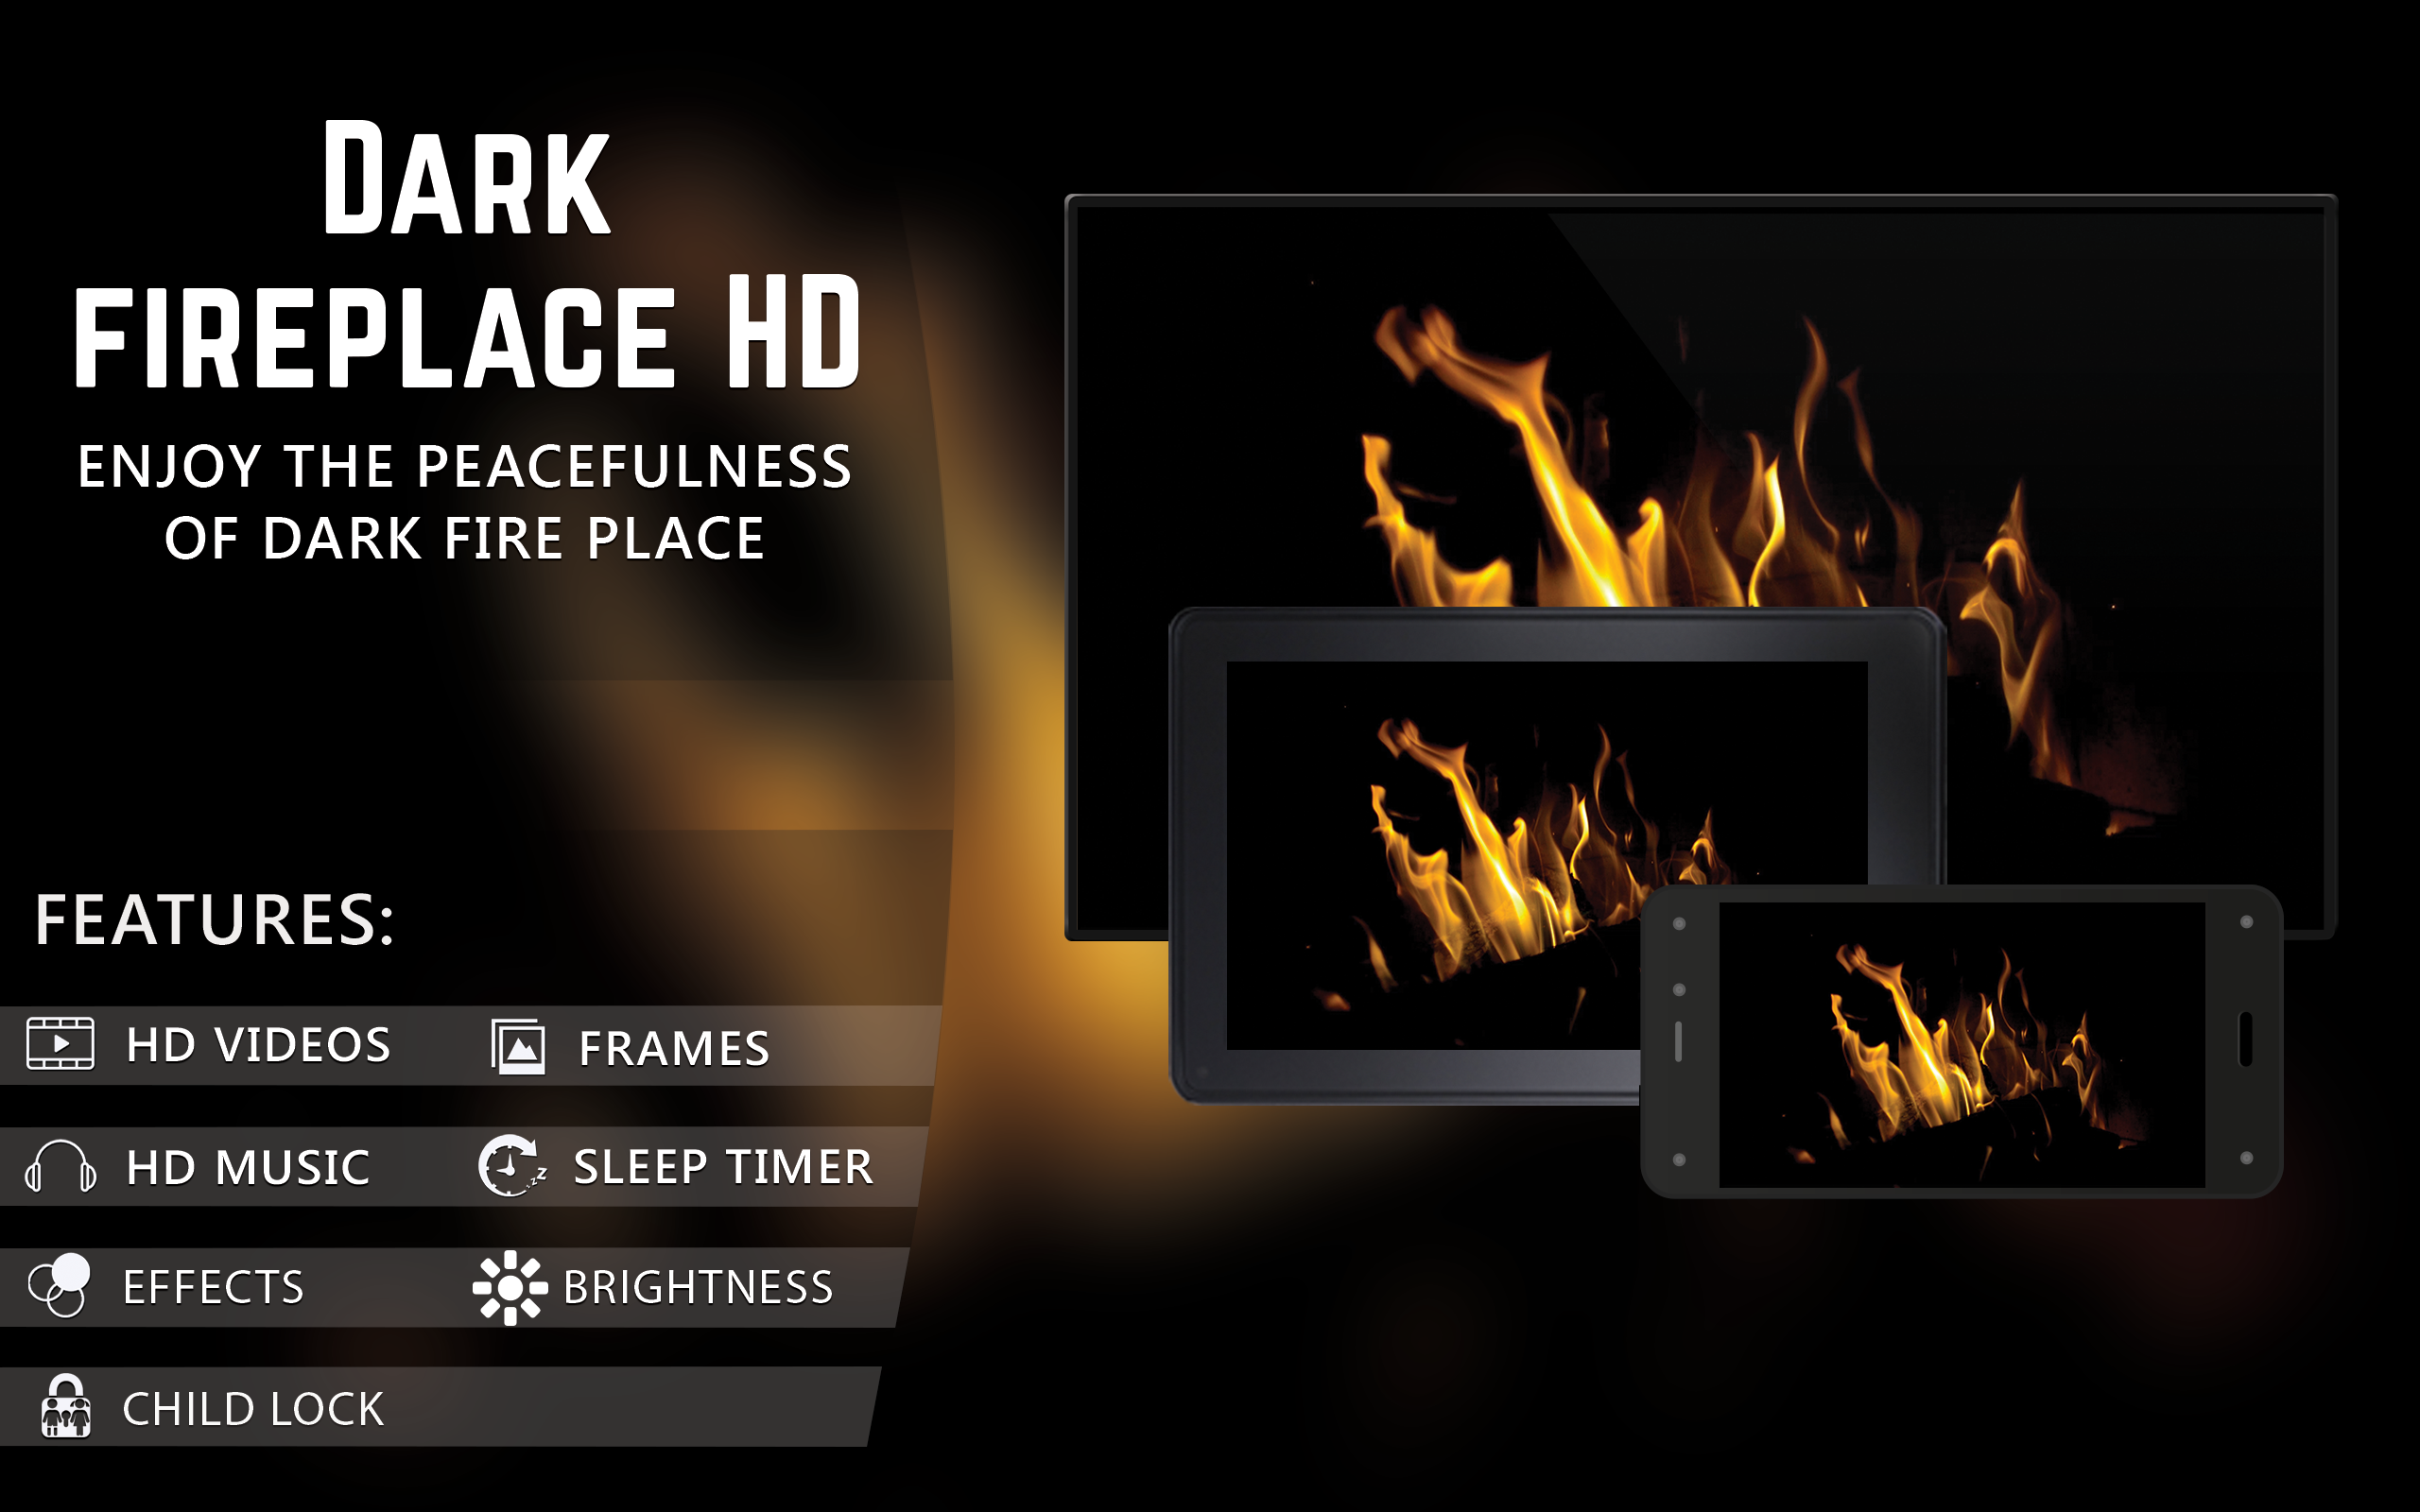 Dark Fireplace HD Enjoy The Winter Christmas Holidays With